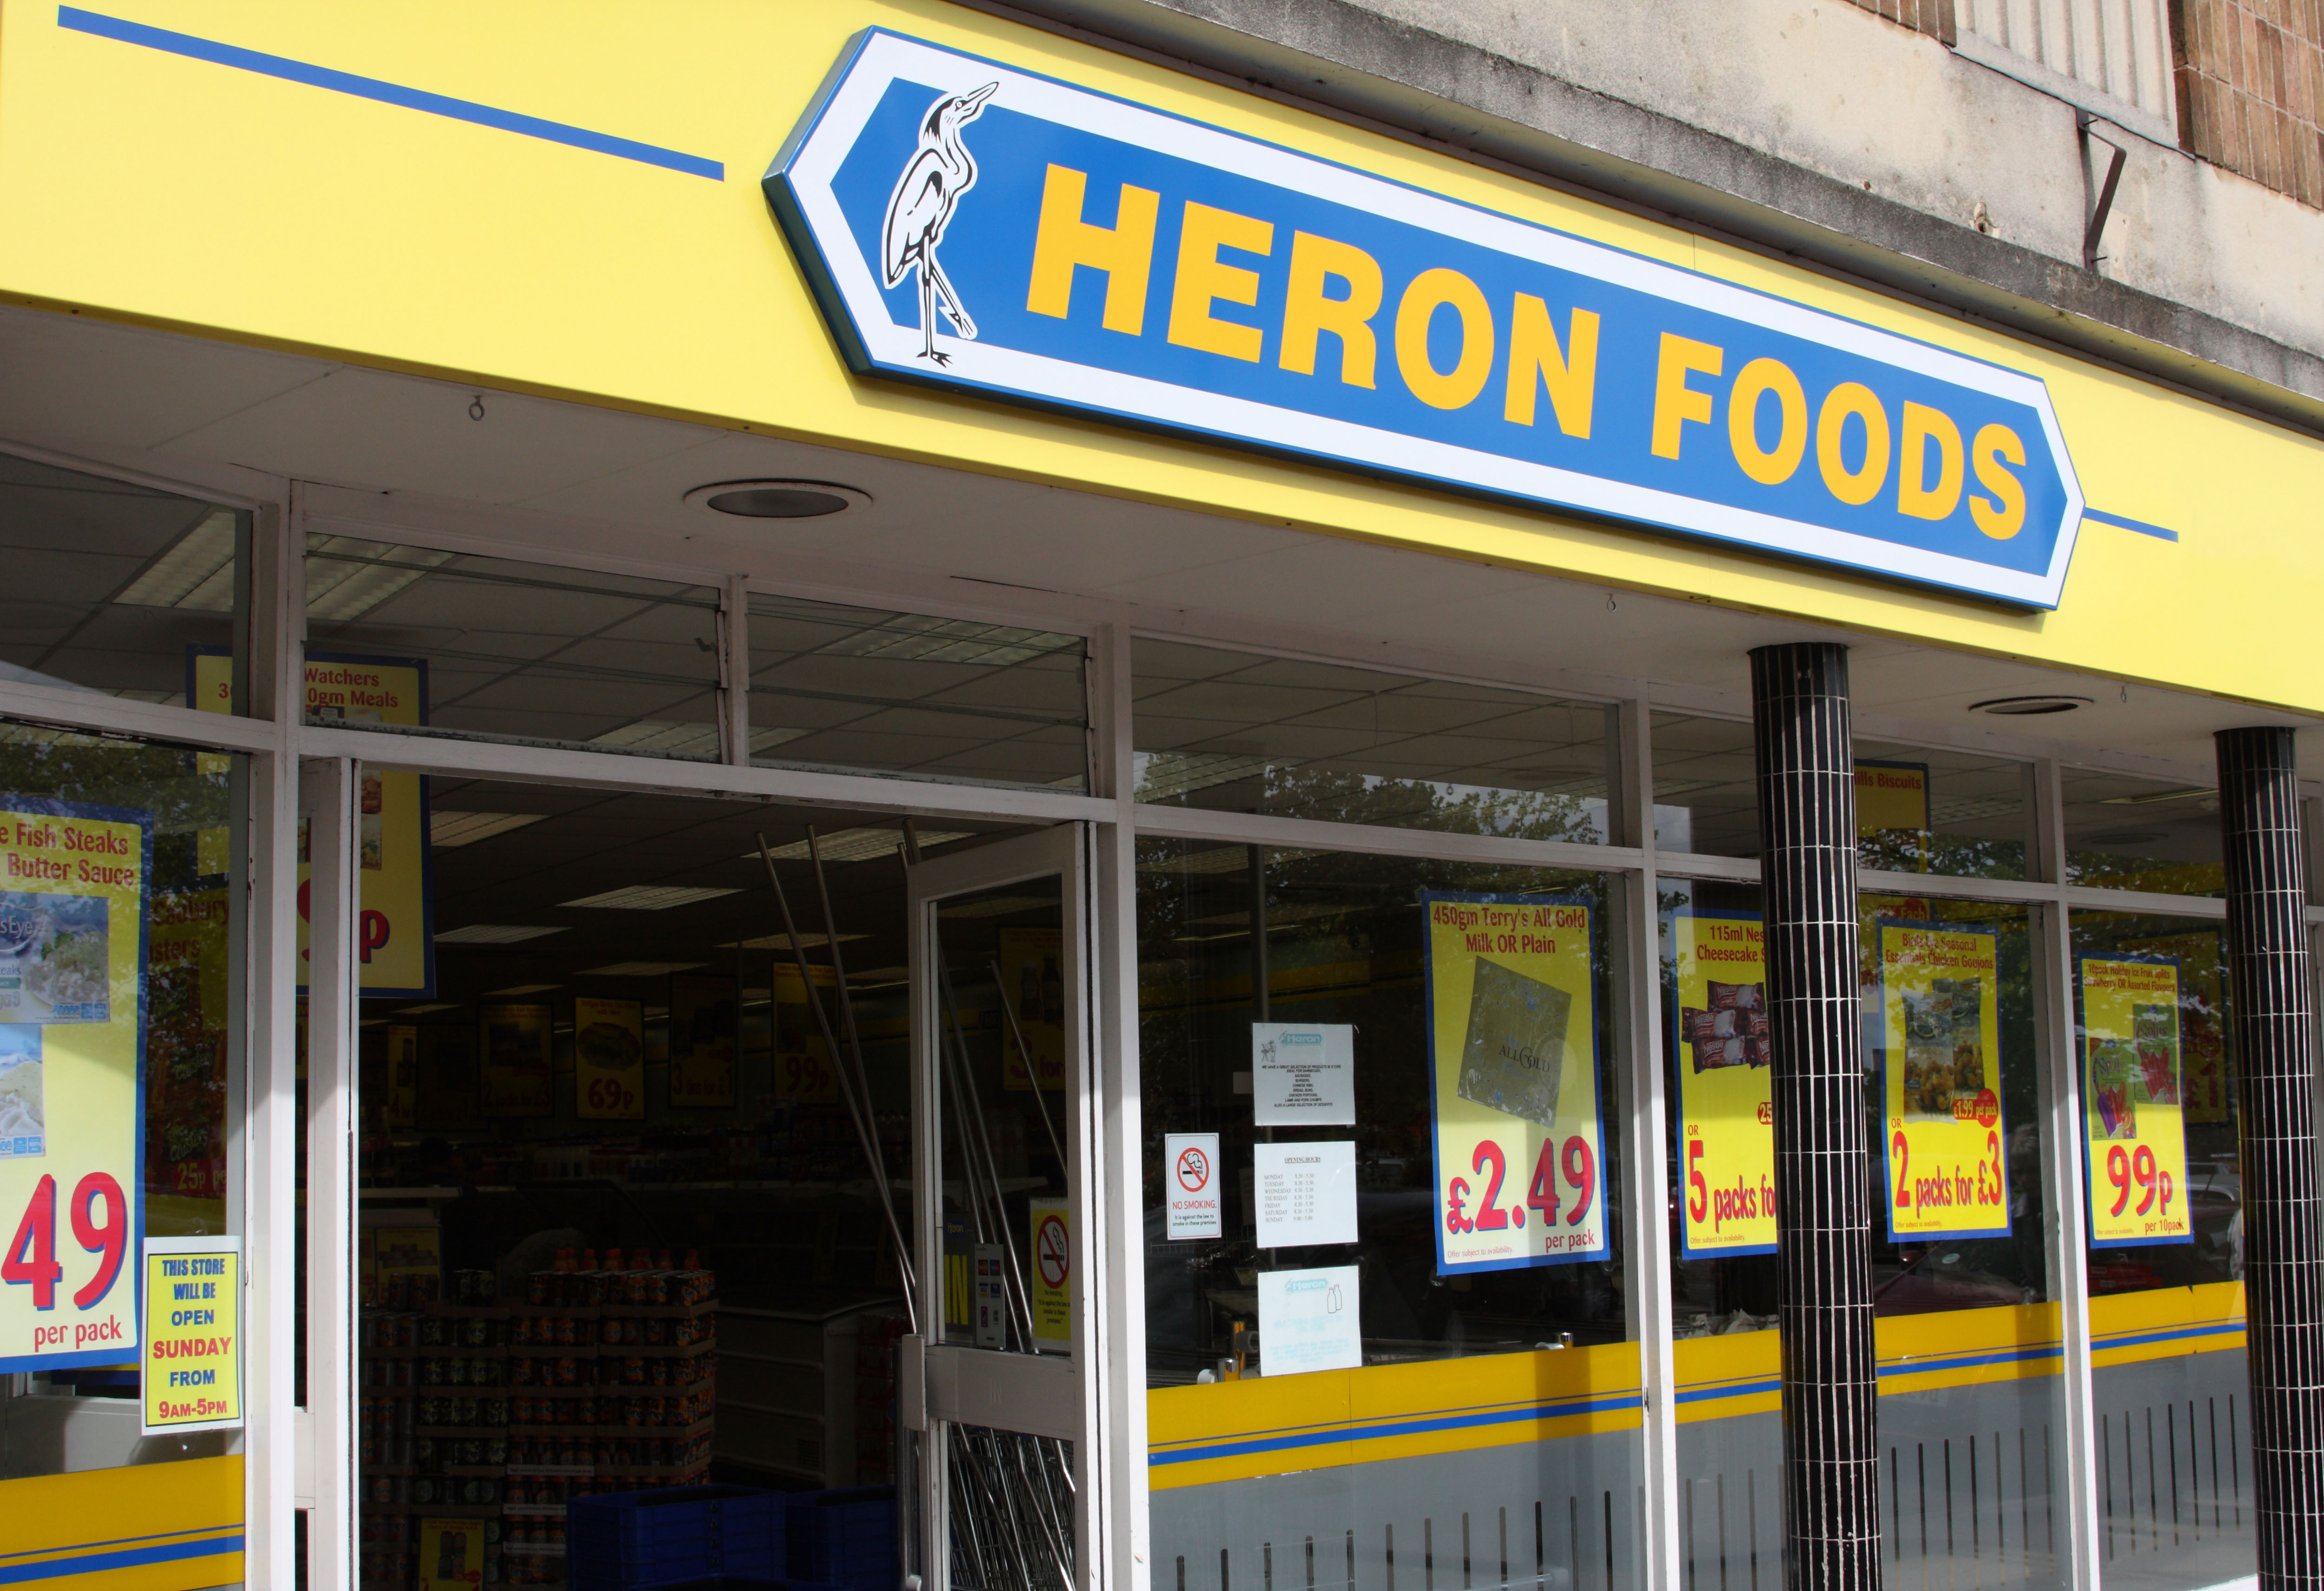 Heron Foods is known for offering great bargain deals